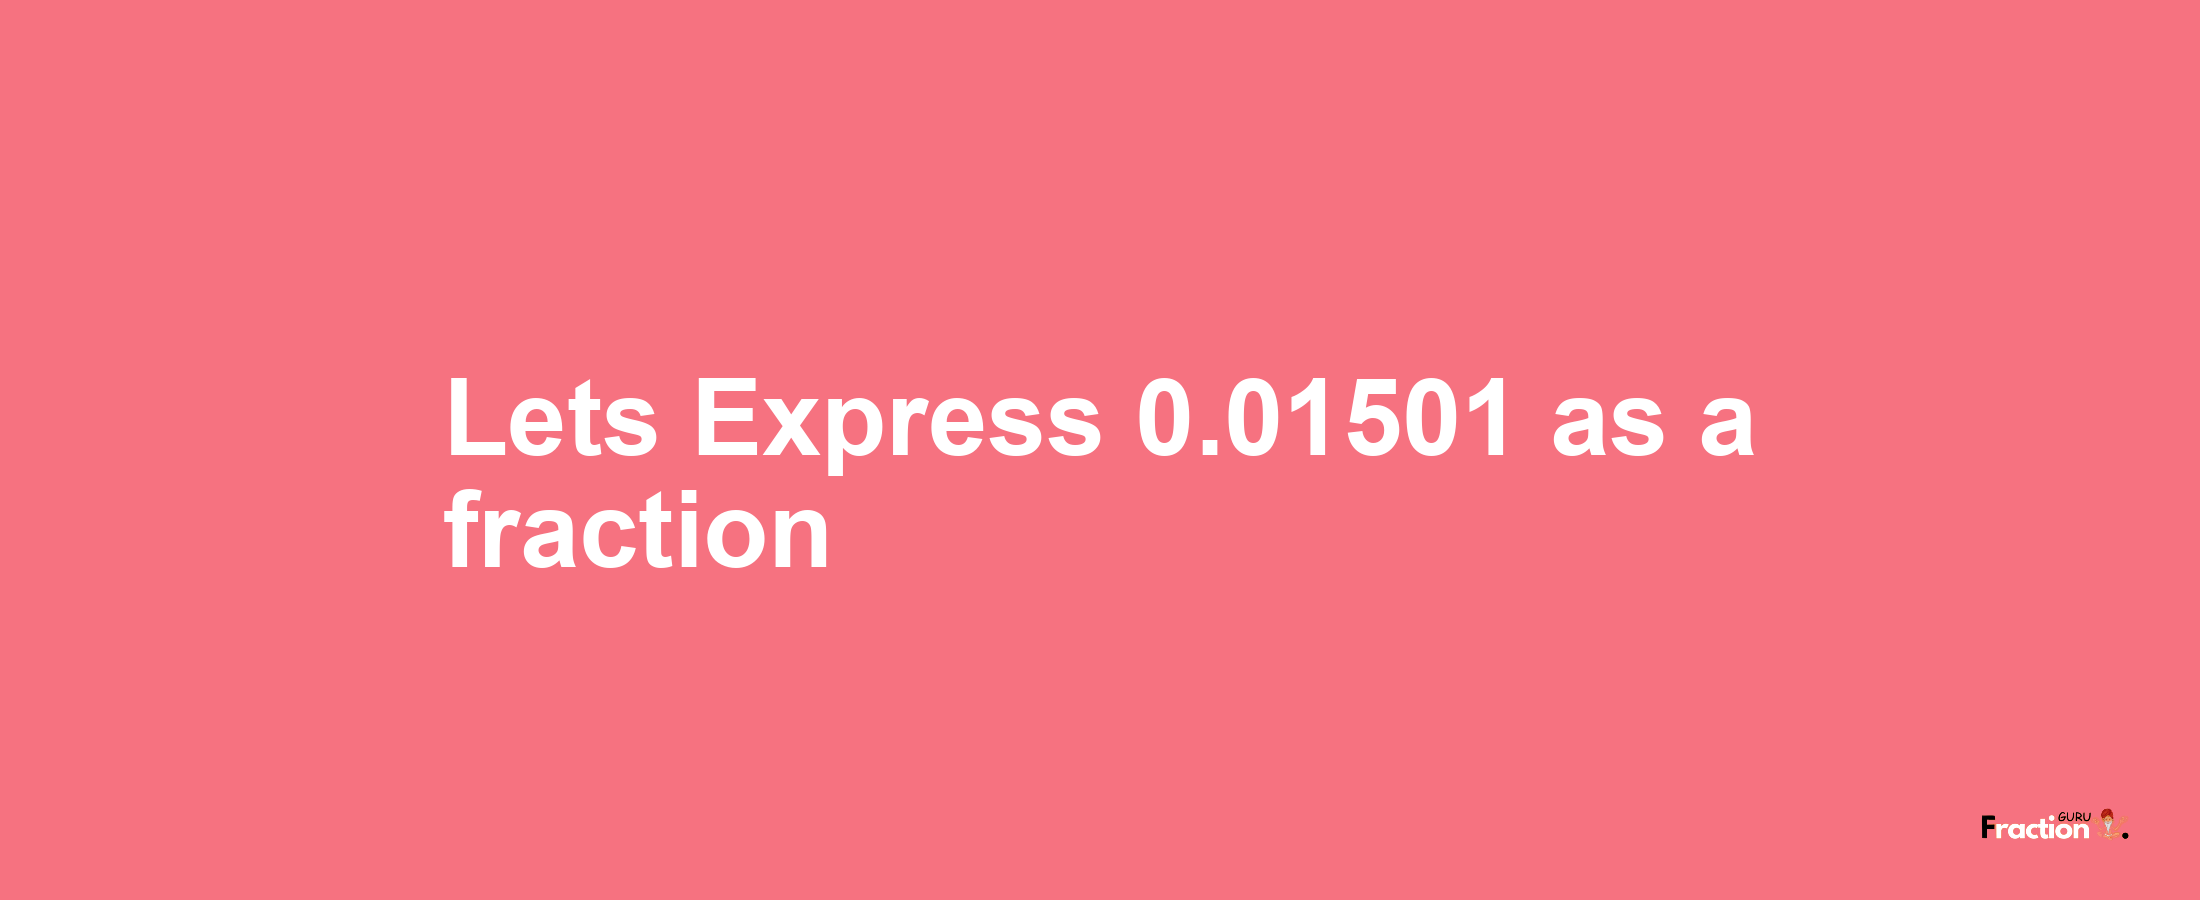 Lets Express 0.01501 as afraction